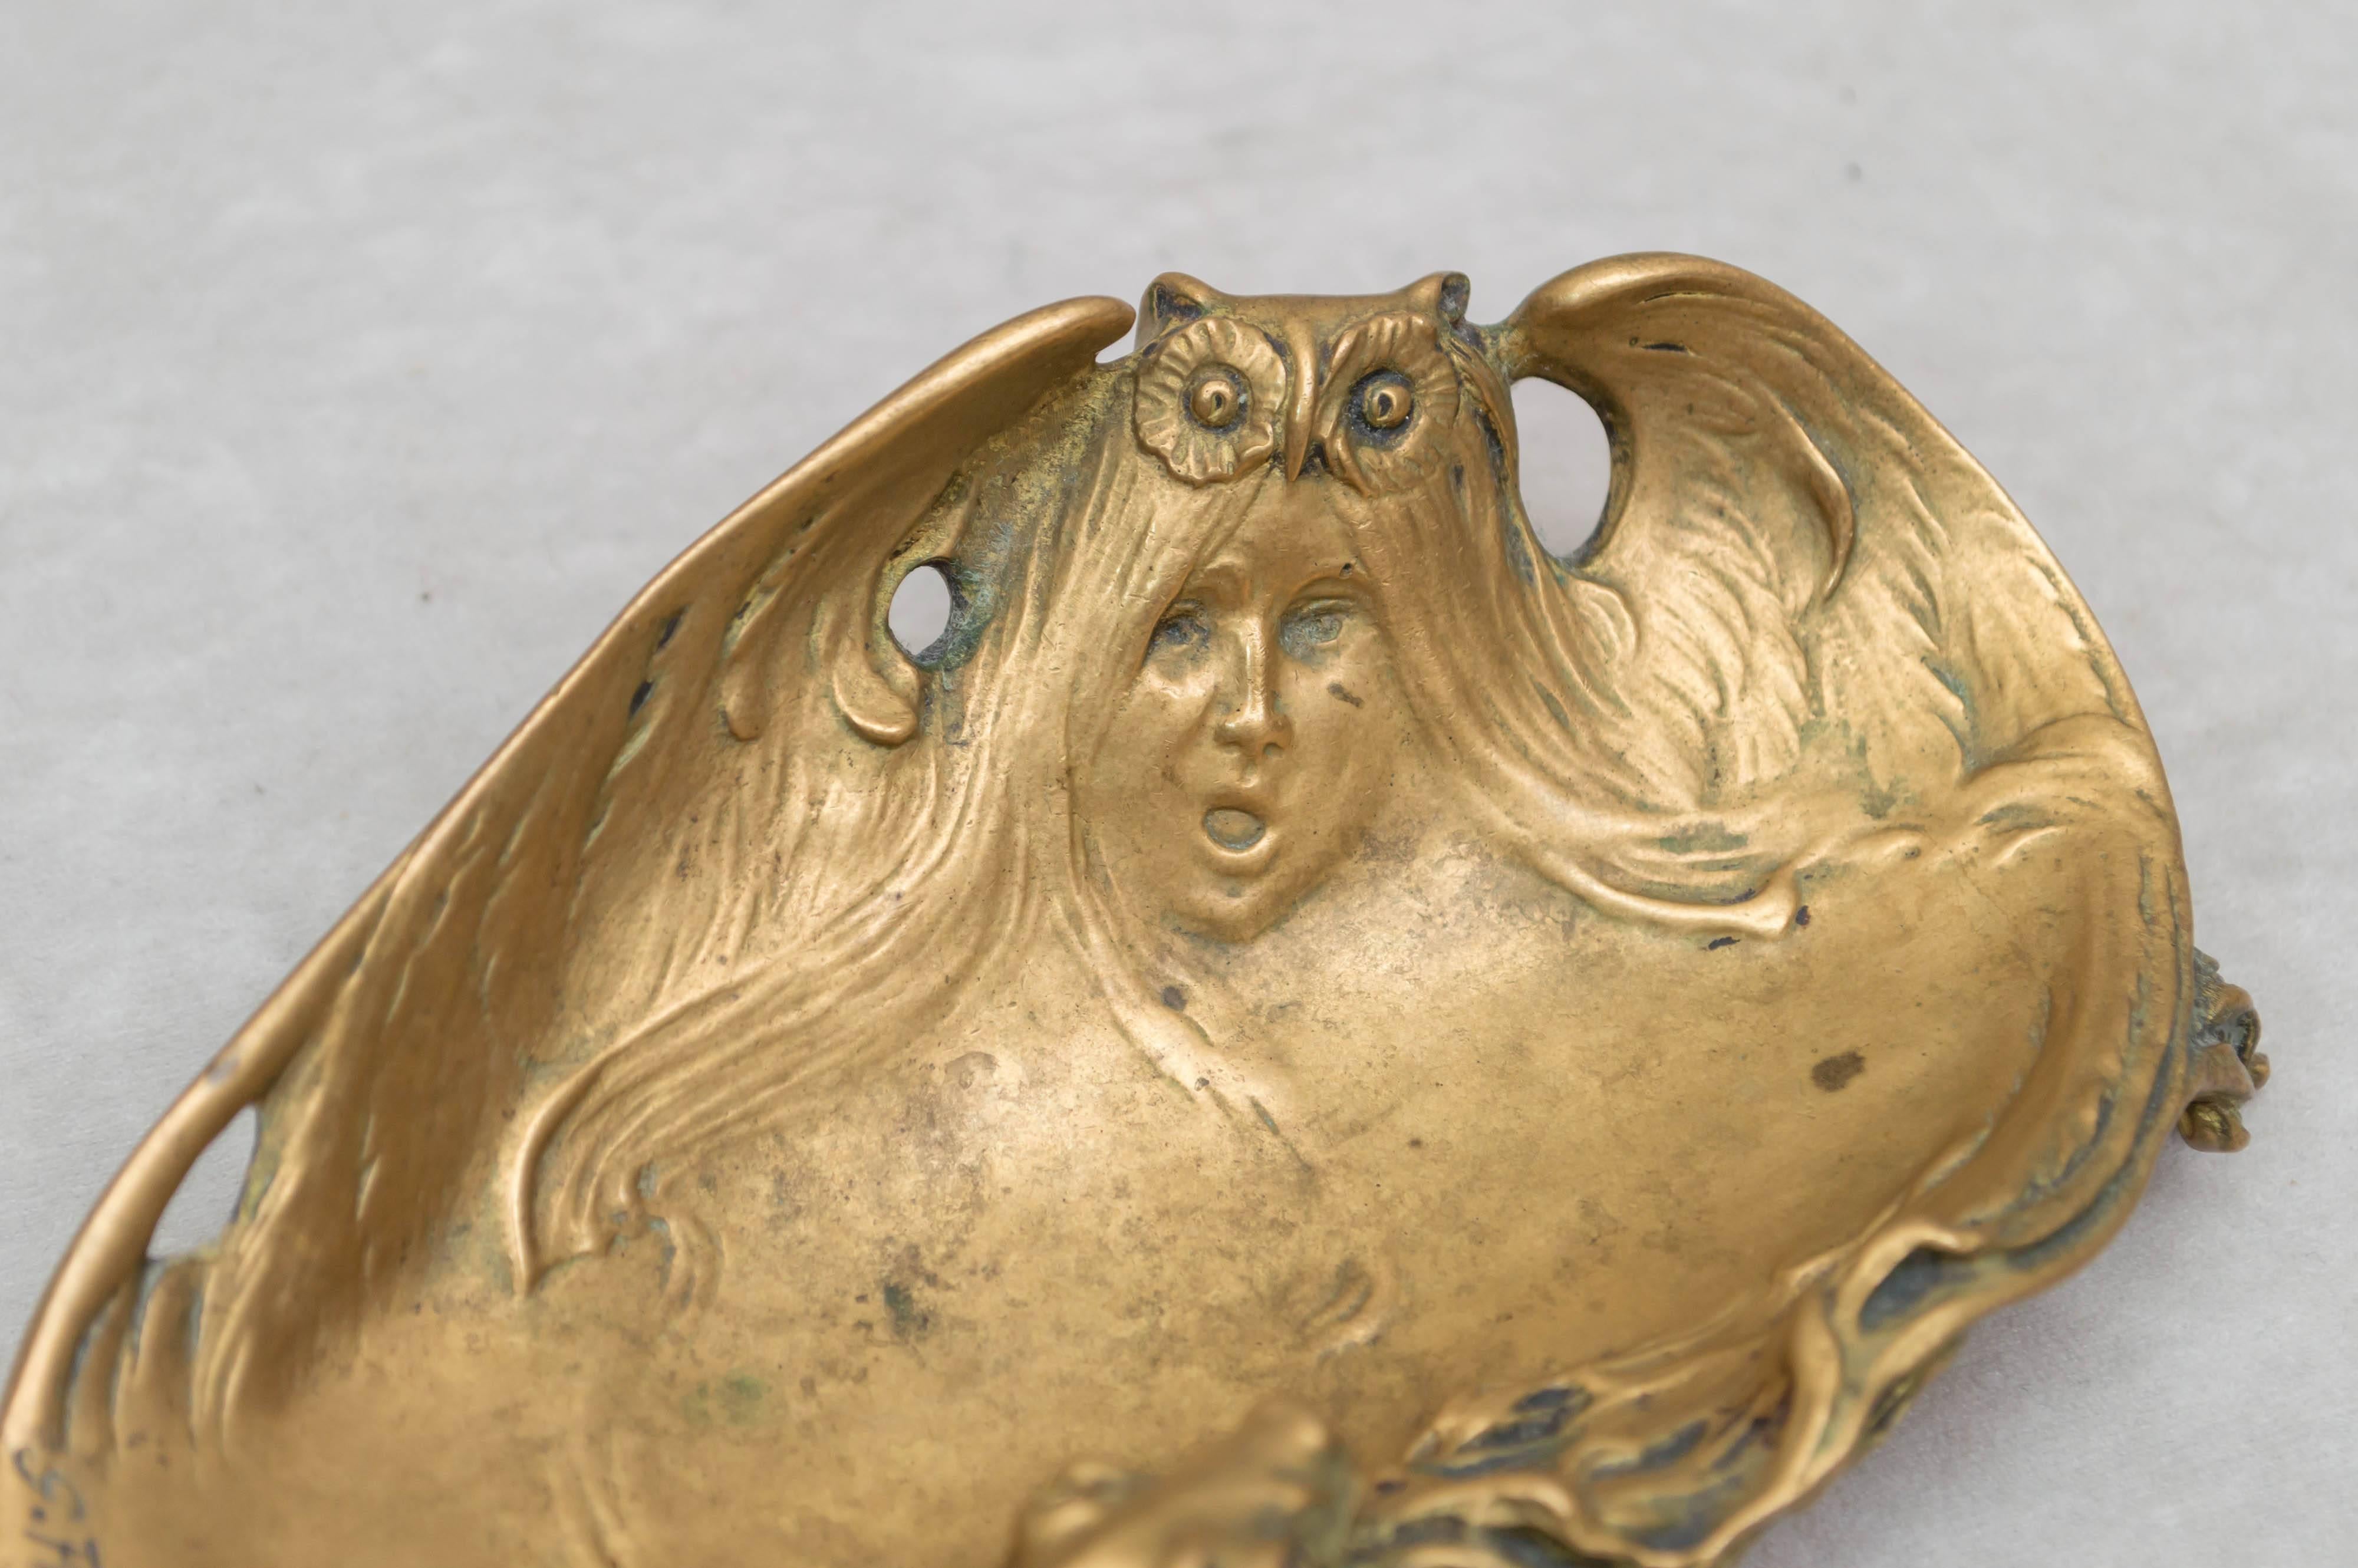 Bronze French Art Nouveau Vide Poche Tray with Women, Owl and Critter